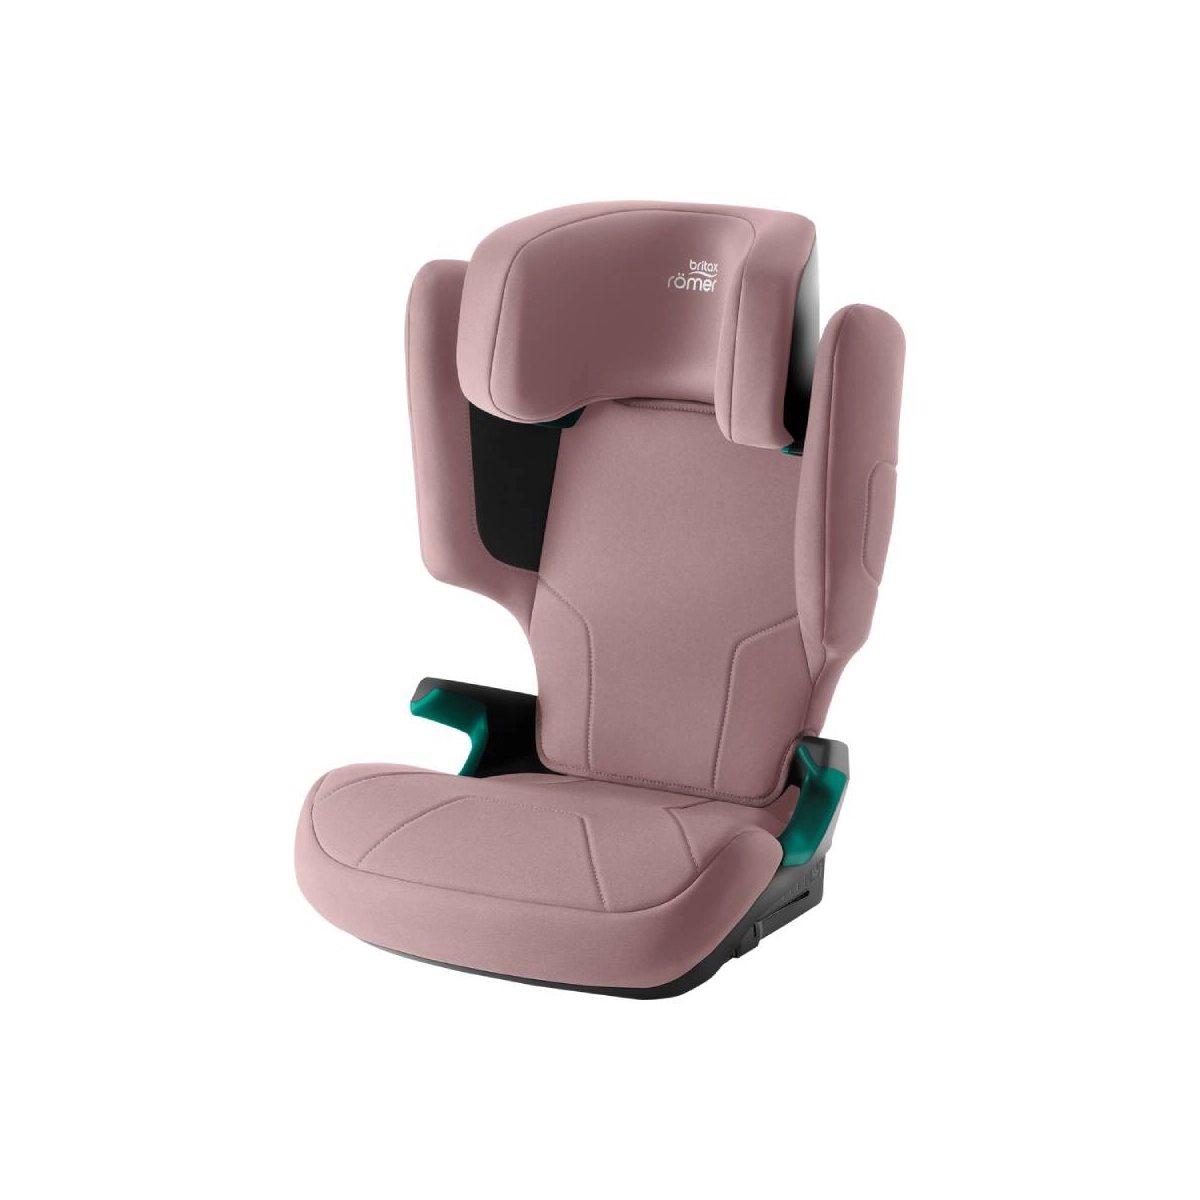 Image of Britax Hi-Liner Group 2/3 High Back Booster Car Seat - Dusty Rose